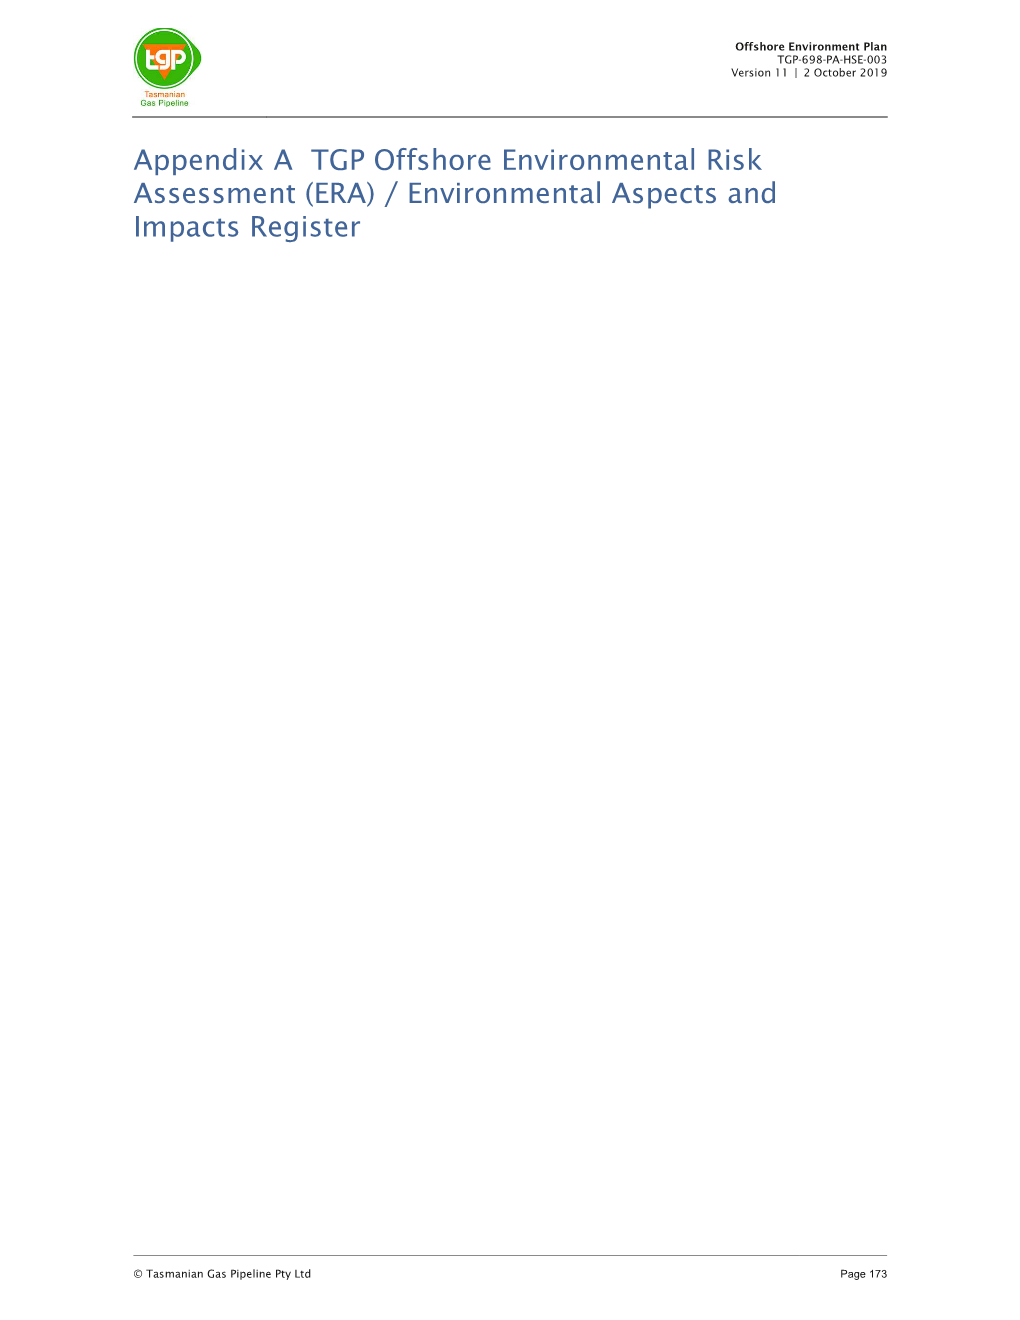 Environmental Aspects and Impacts Register